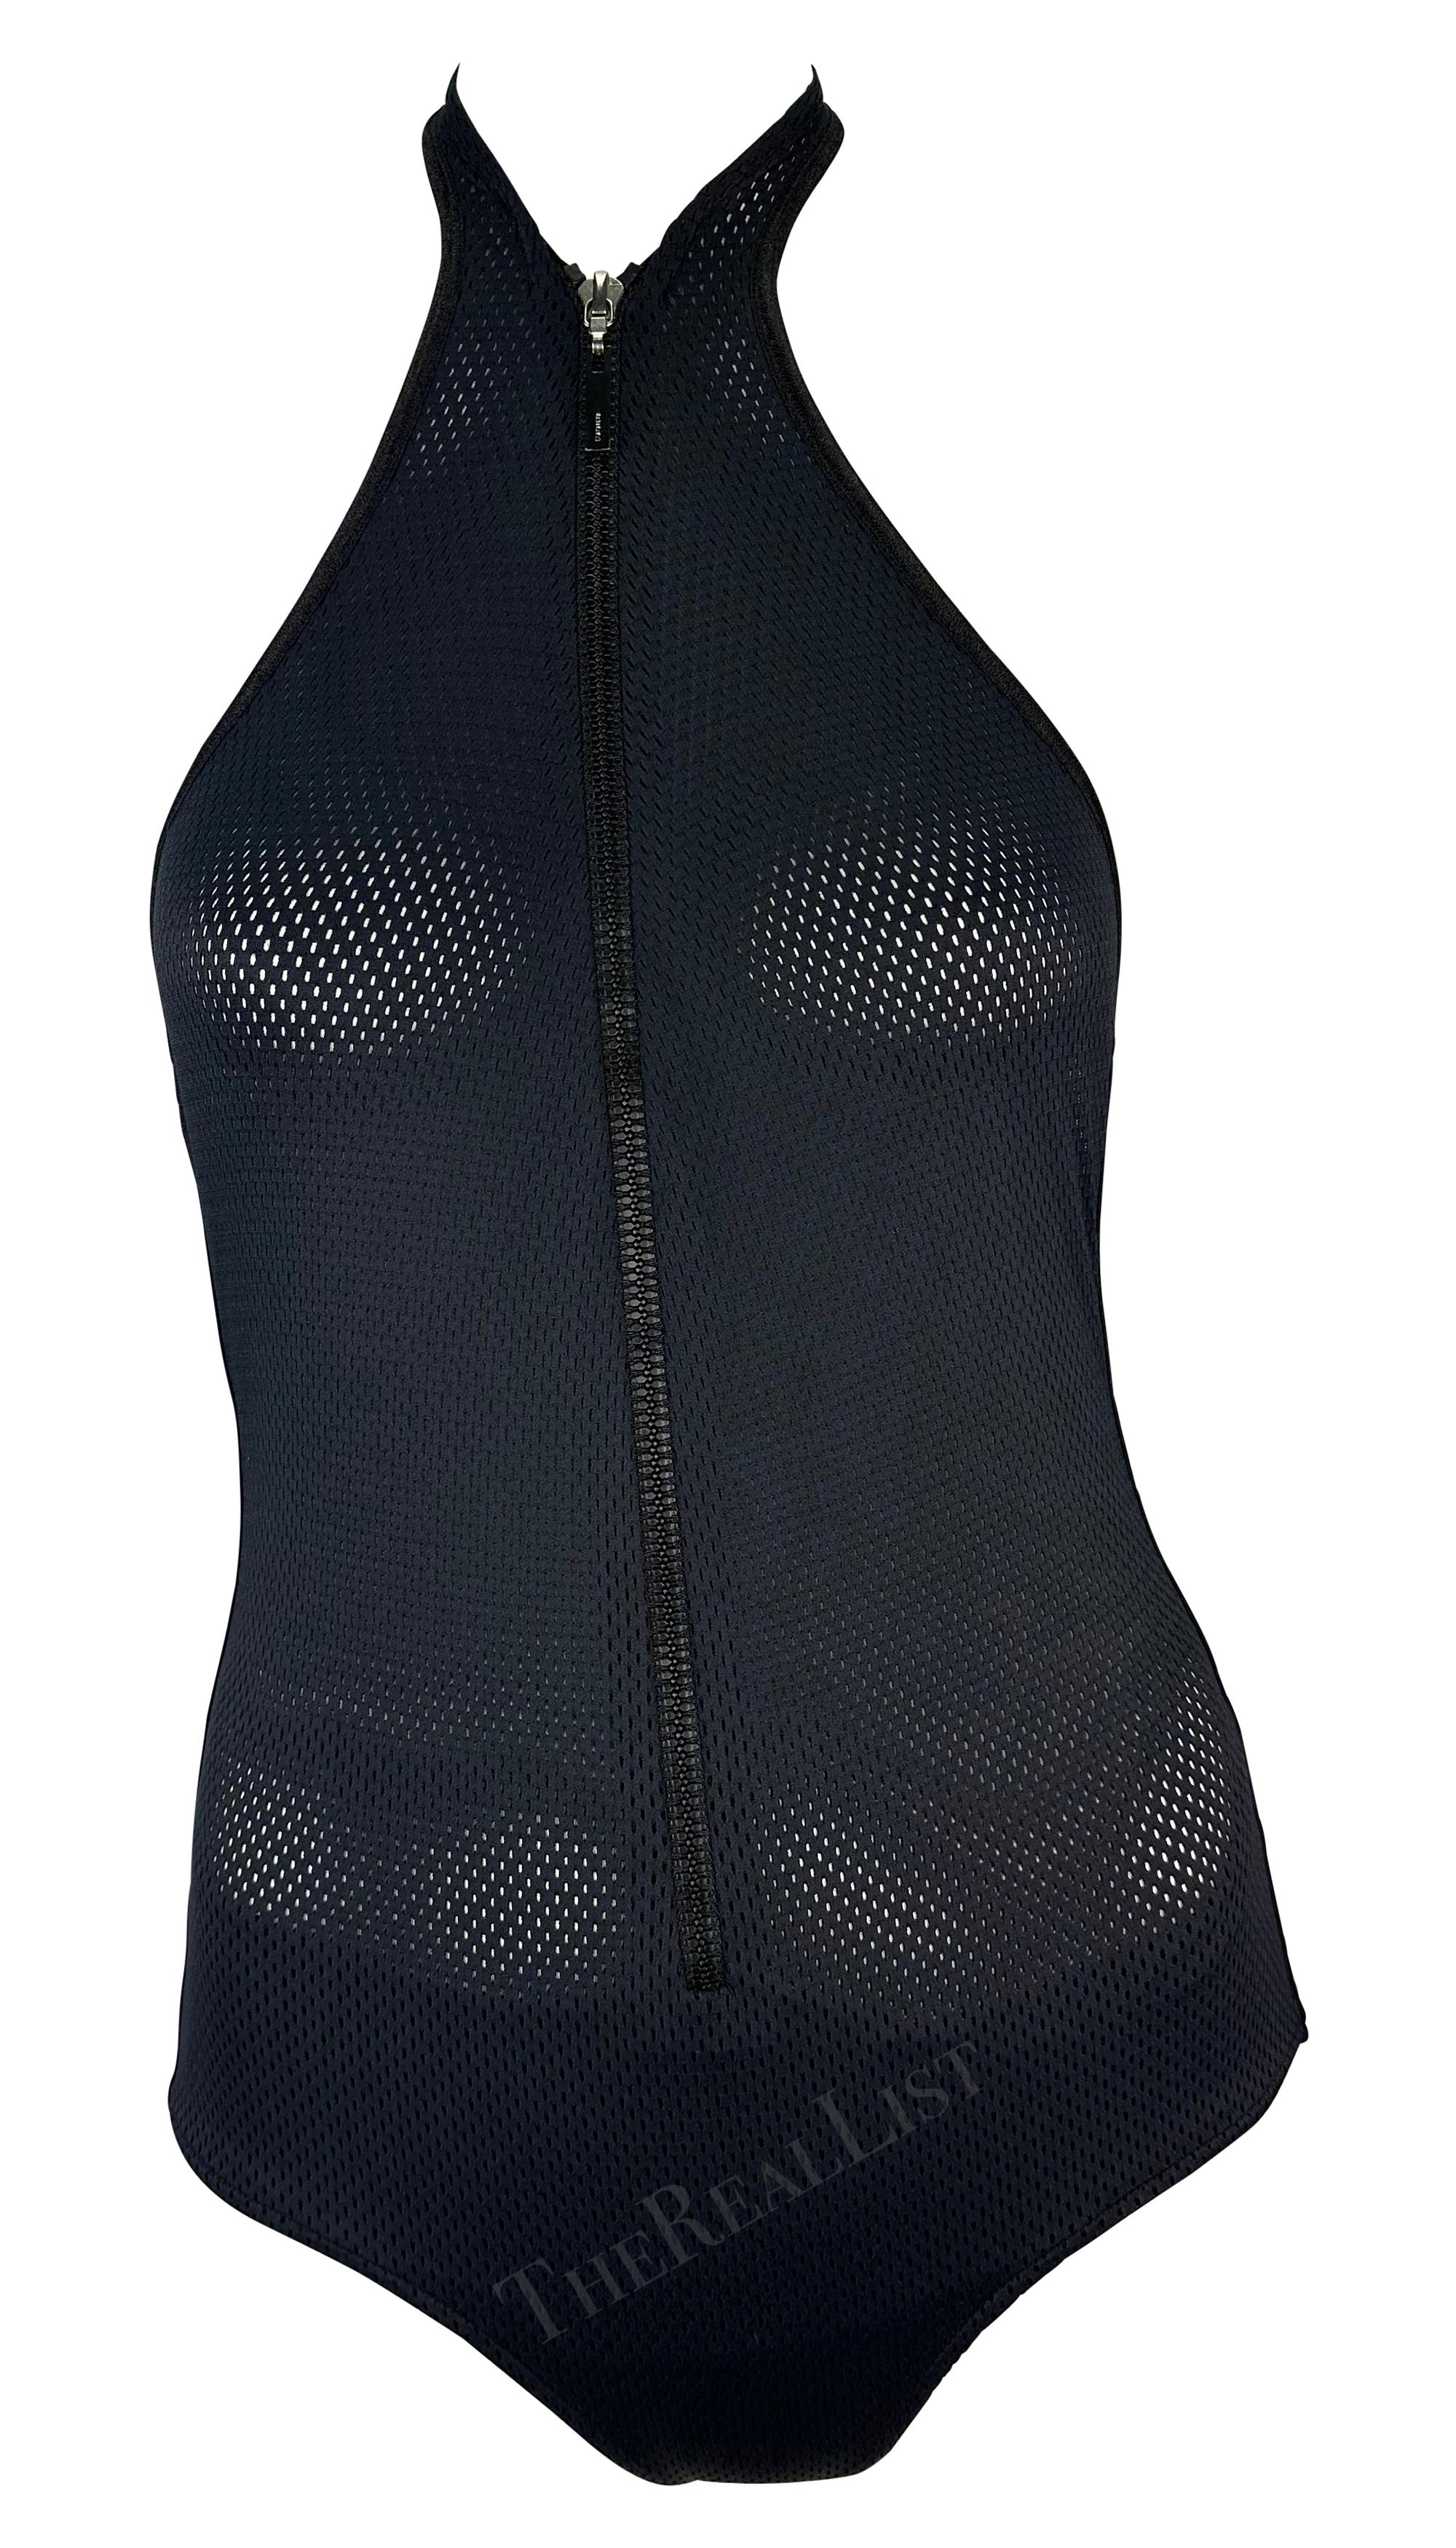 S/S 2002 Gucci by Tom Ford Sheer Mesh Zip-Up Plunging Halter One-Piece Swimsuit For Sale 4